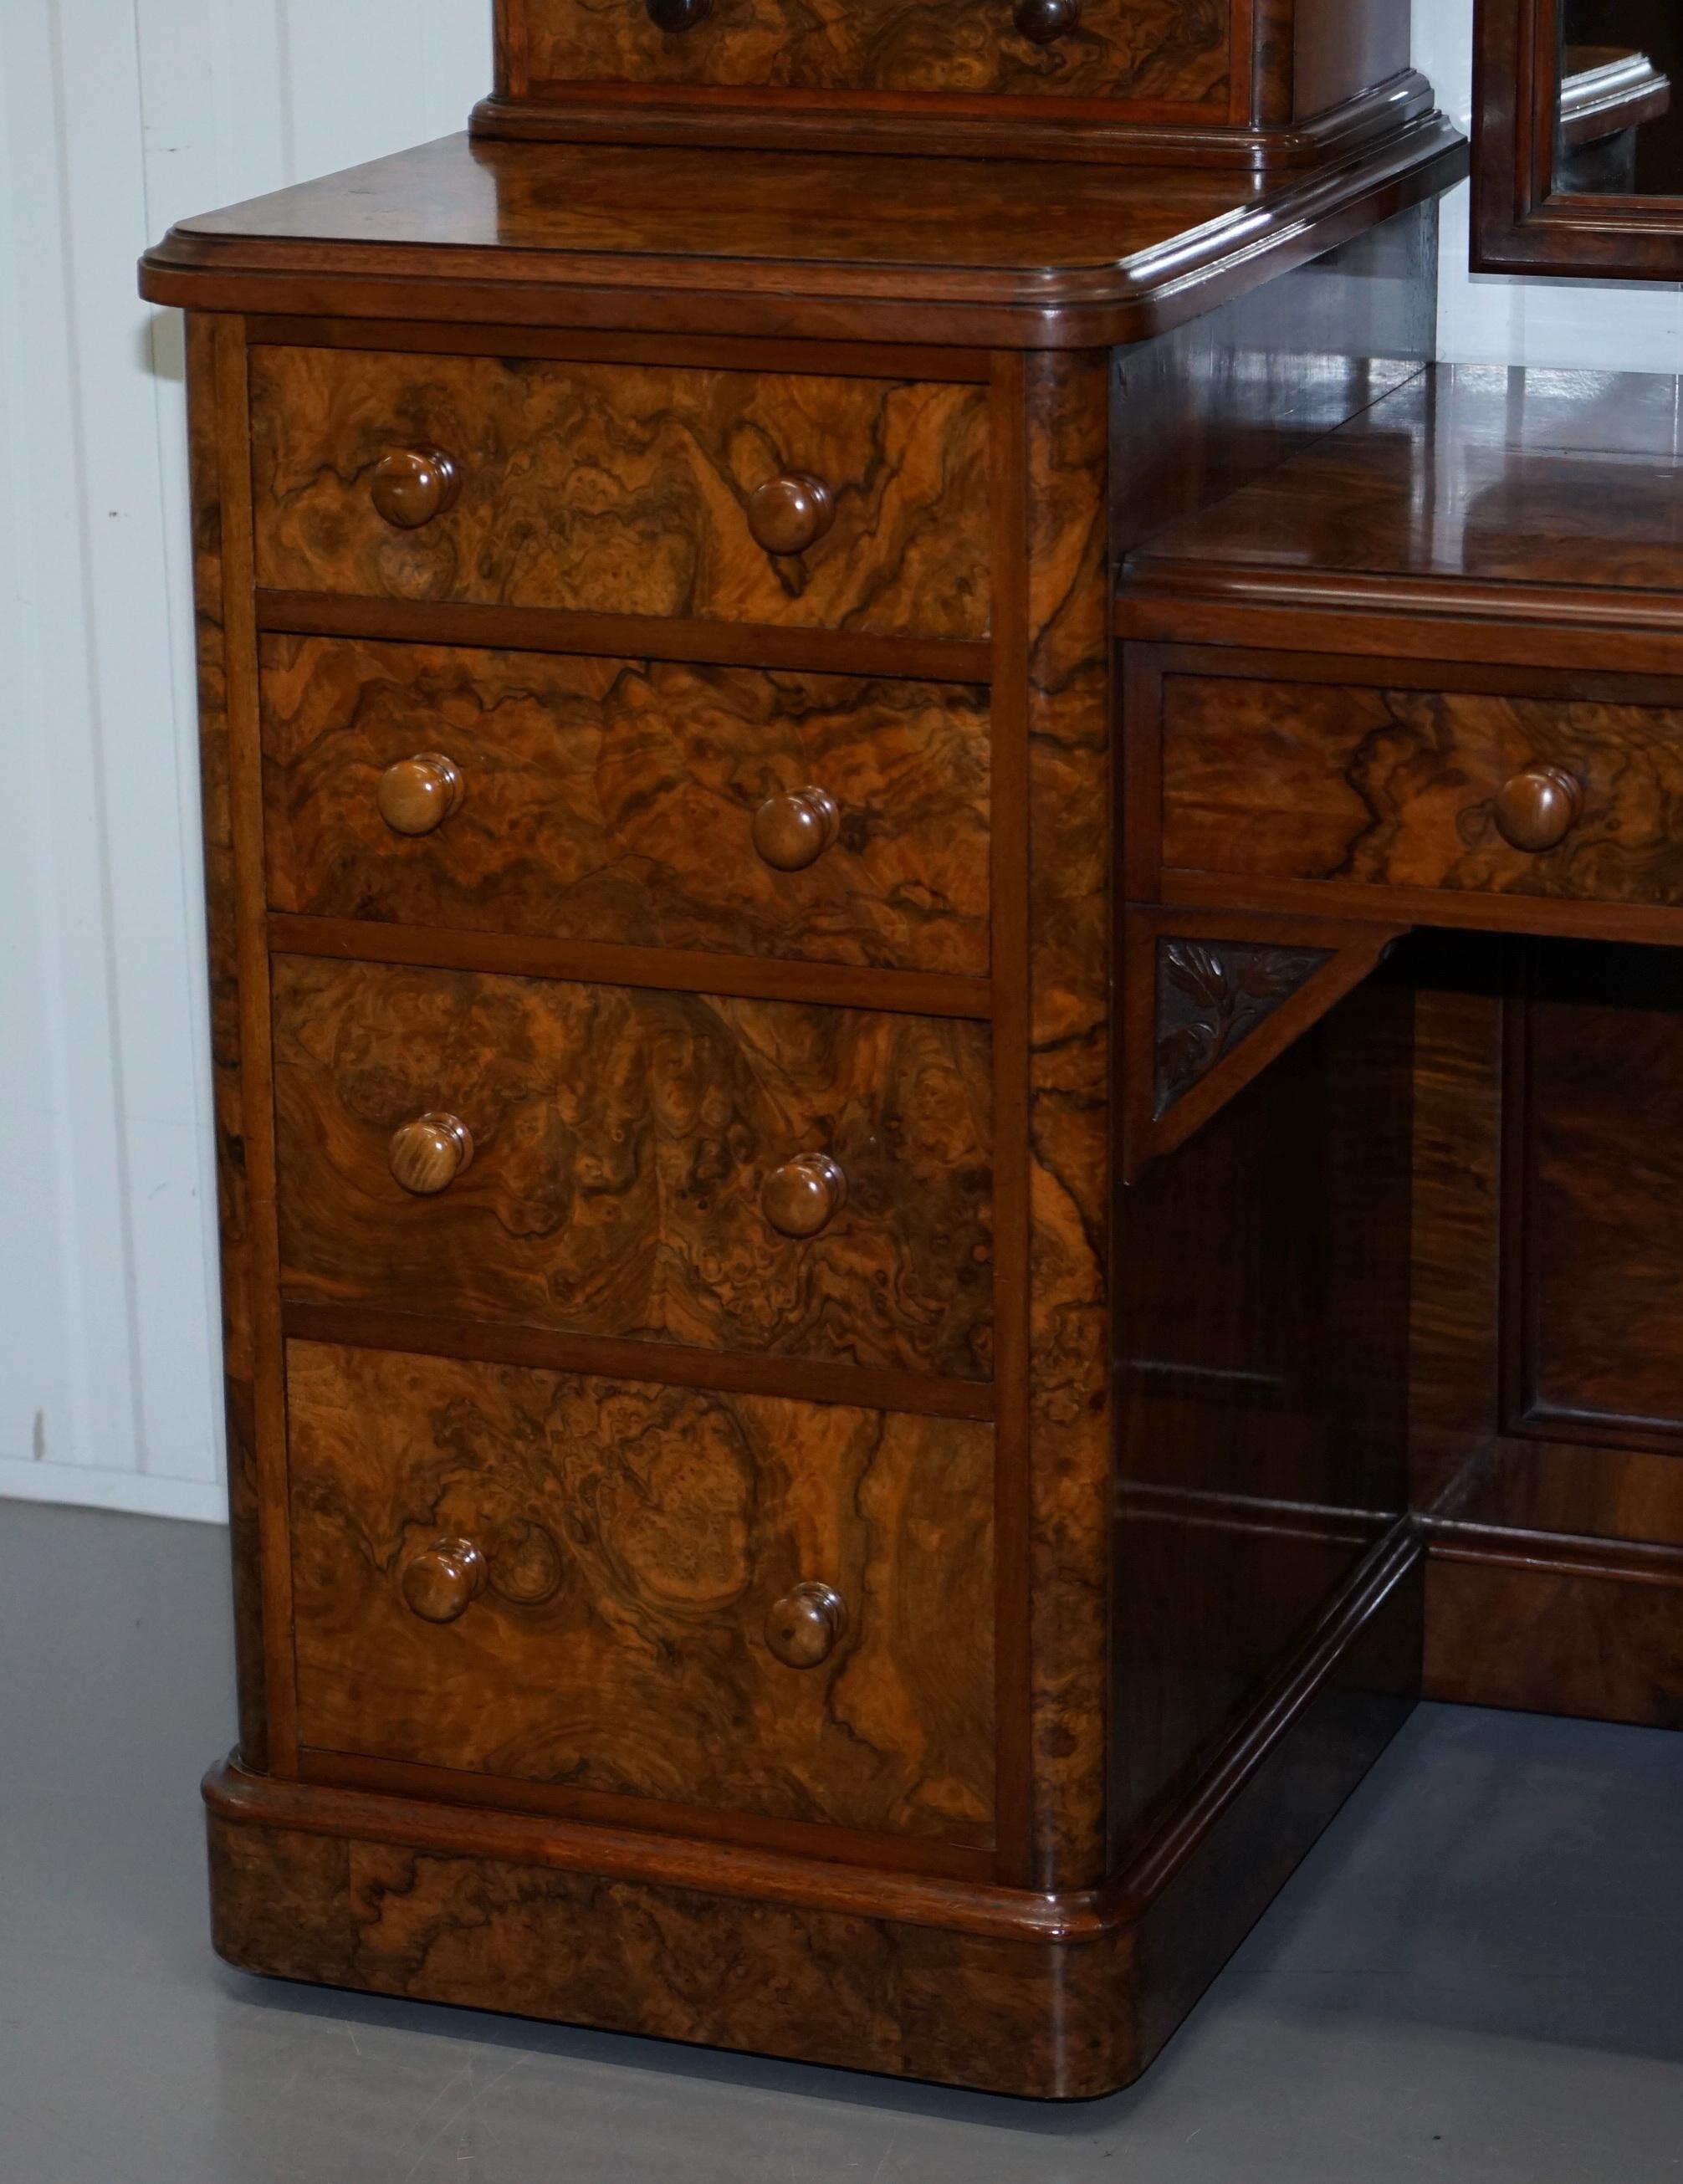 Hand-Crafted Stunning Victorian Collinge's Burr Walnut Dressing Table with Drawers and Mirror